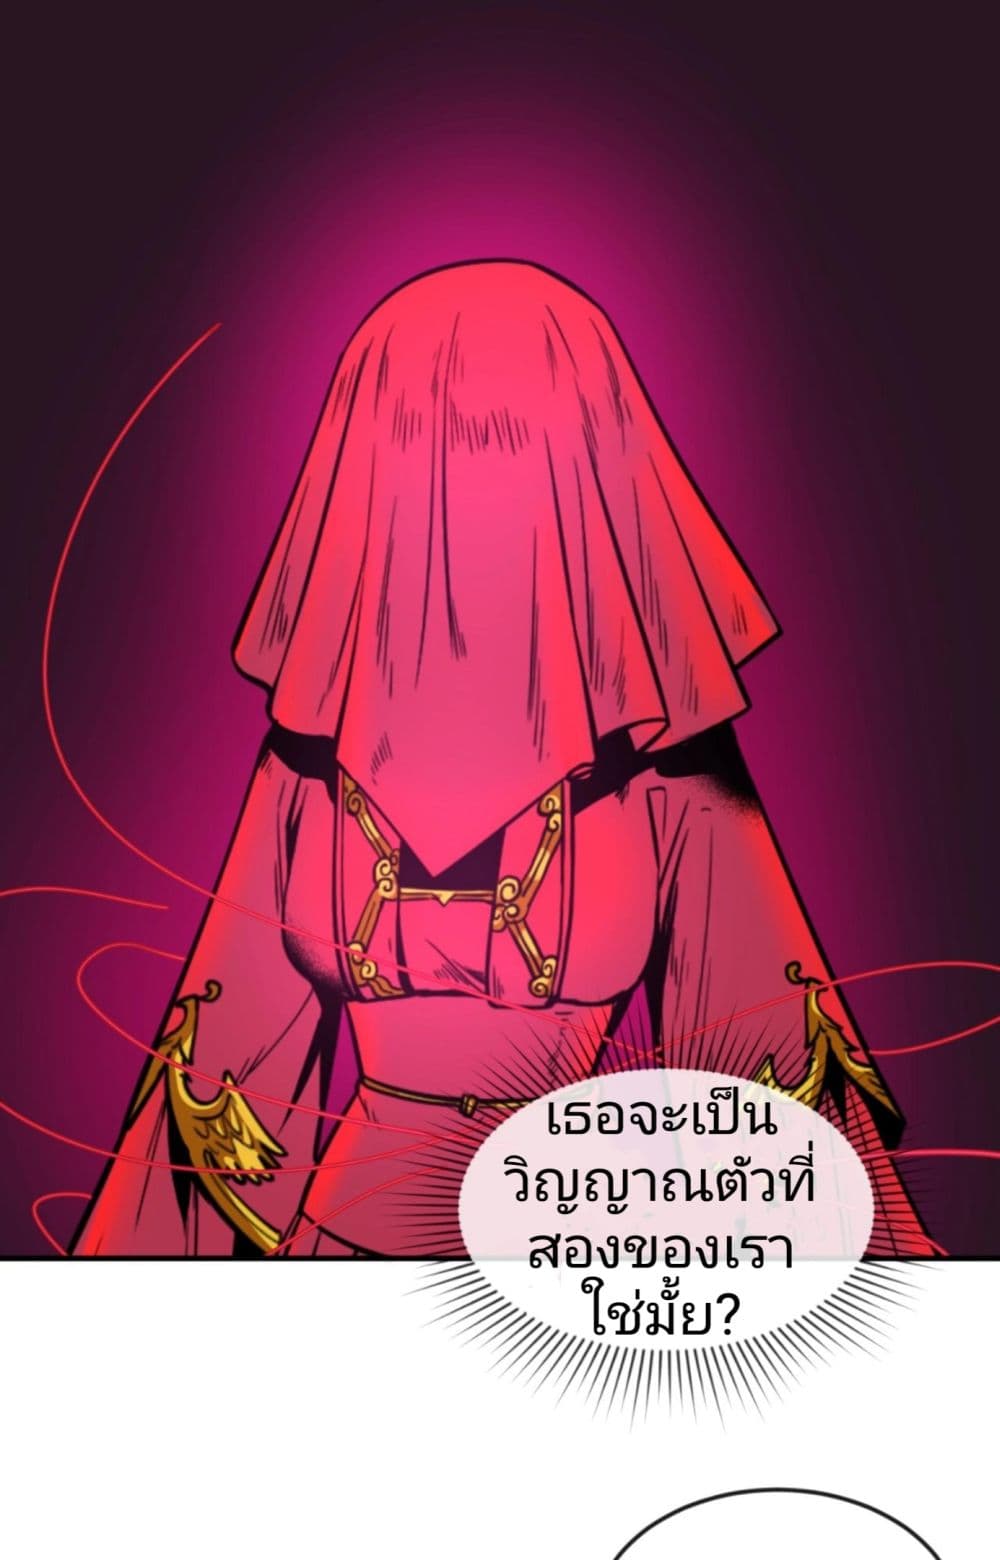 The Age of Ghost Spirits à¸à¸­à¸à¸à¸µà¹ 13 (32)